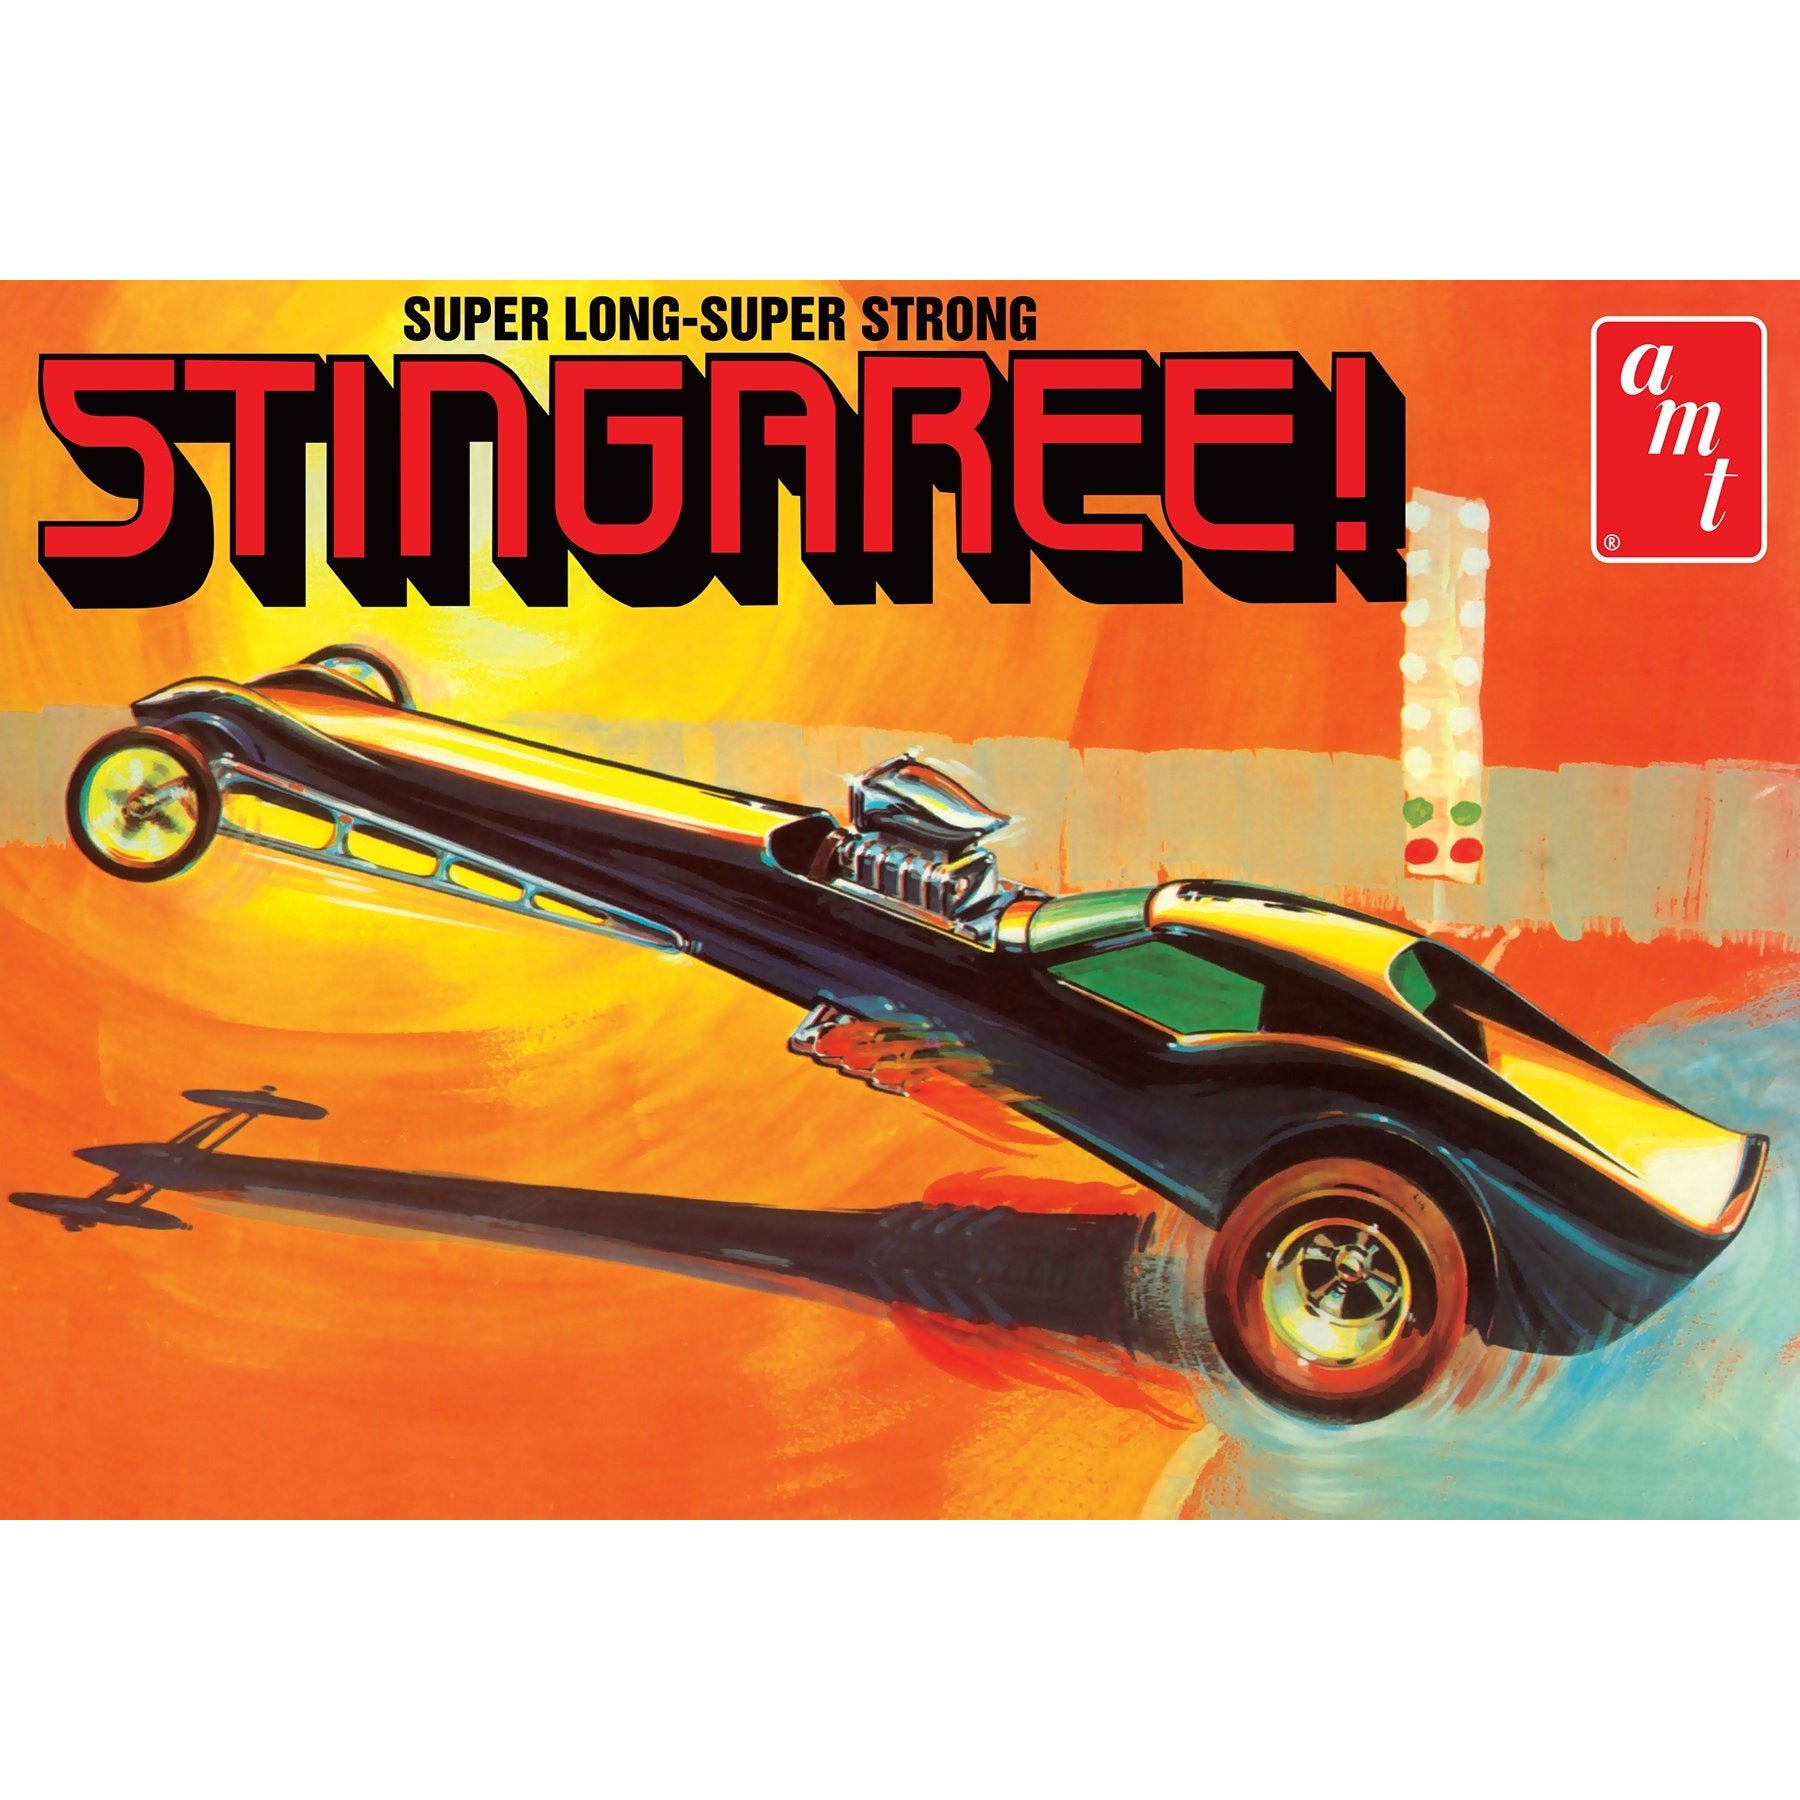 Super Long-Super Strong Stingaree  1/25 #AMT1259/12 by AMT